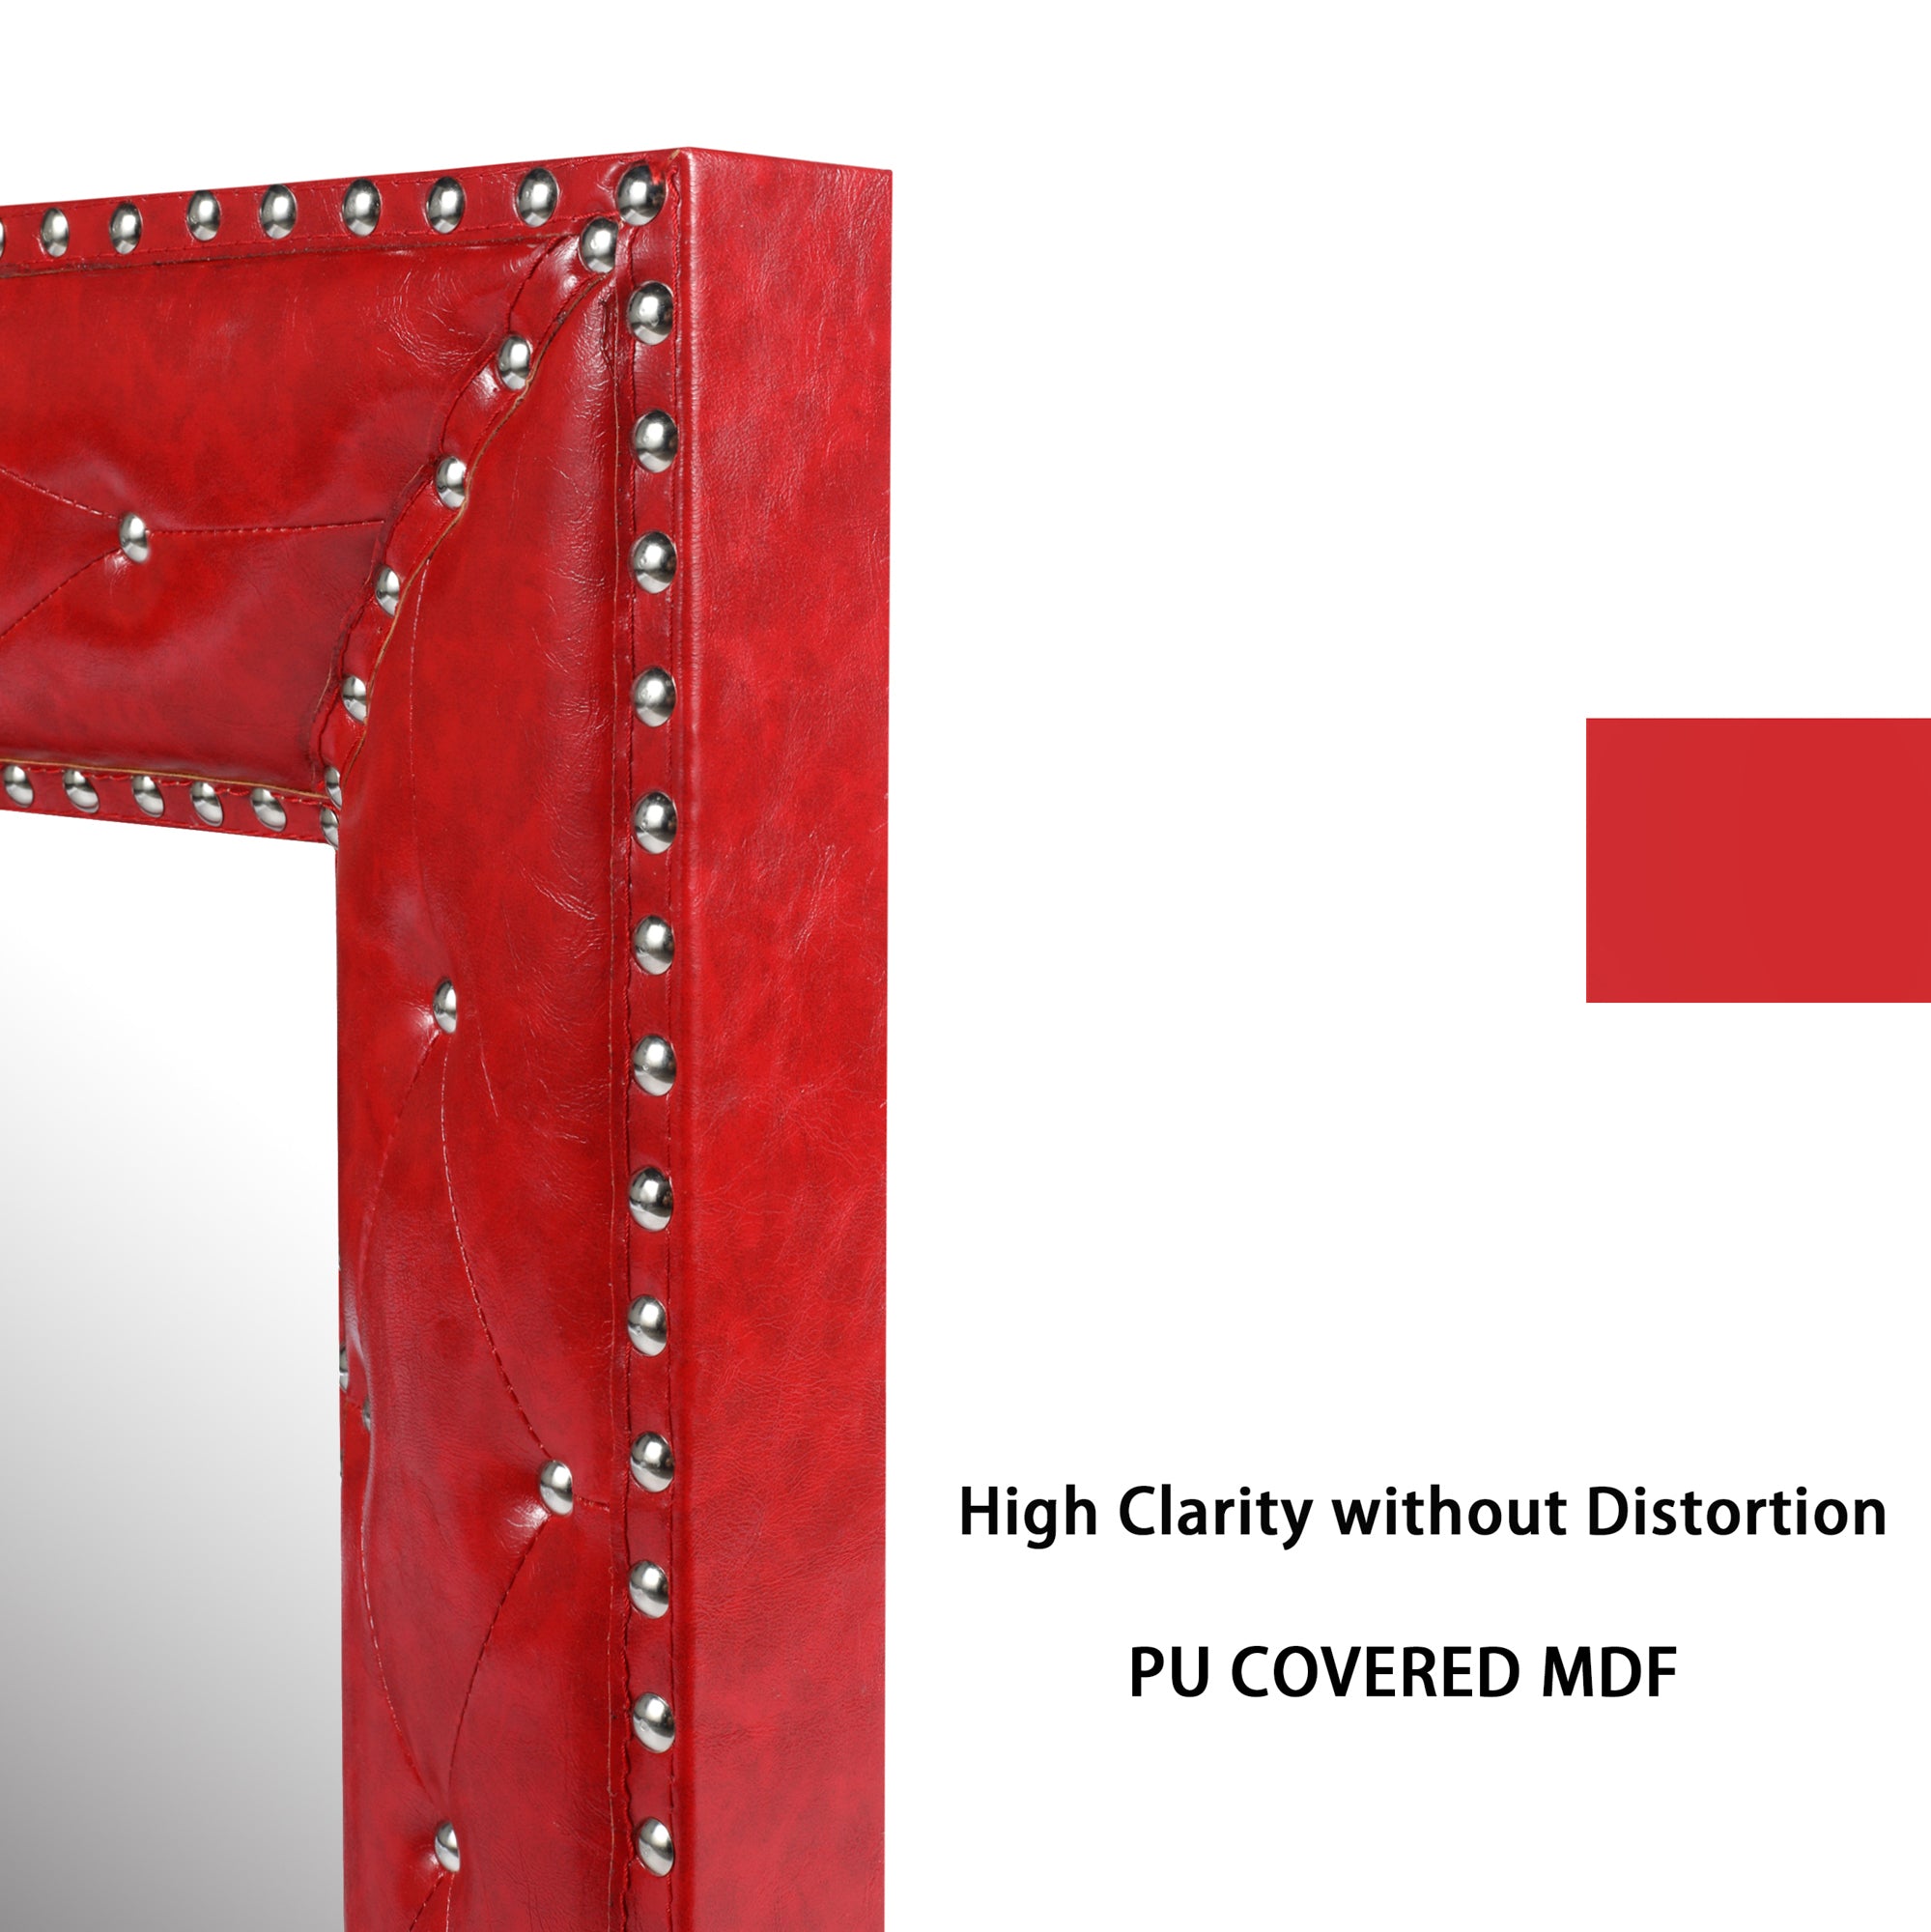 RED Rectangle Decorative Wall Mirror